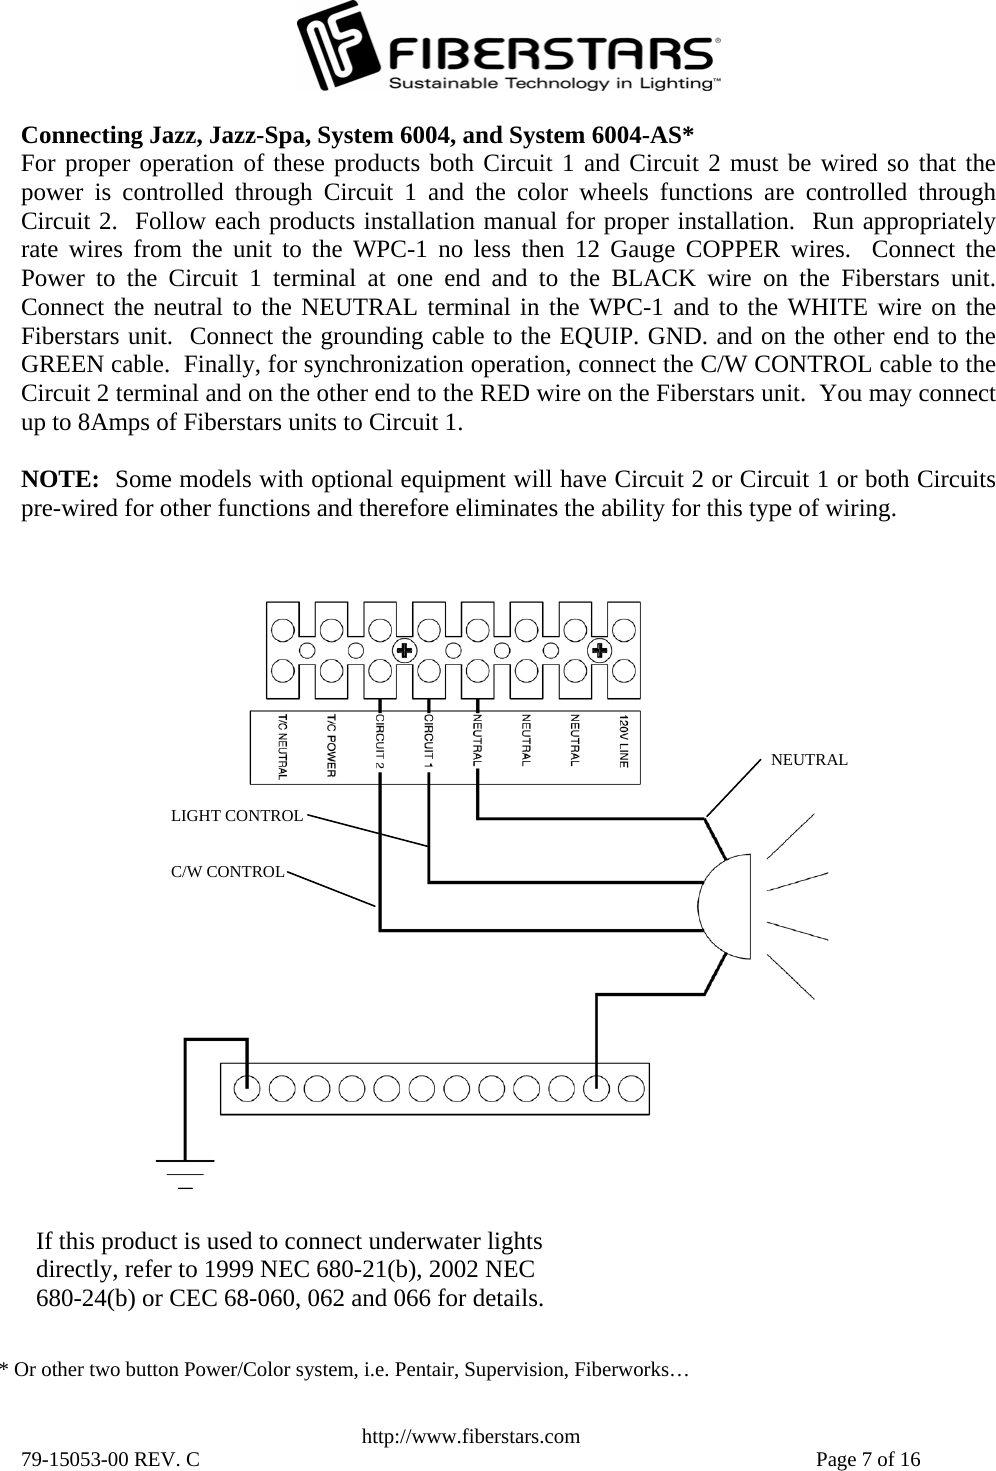   http://www.fiberstars.com 79-15053-00 REV. C    Page 7 of 16 C/W CONTROL LIGHT CONTROL NEUTRAL Connecting Jazz, Jazz-Spa, System 6004, and System 6004-AS* For proper operation of these products both Circuit 1 and Circuit 2 must be wired so that thepower is controlled through Circuit 1 and the color wheels functions are controlled throughCircuit 2.  Follow each products installation manual for proper installation.  Run appropriatelyrate wires from the unit to the WPC-1 no less then 12 Gauge COPPER wires.  Connect thePower to the Circuit 1 terminal at one end and to the BLACK wire on the Fiberstars unit.Connect the neutral to the NEUTRAL terminal in the WPC-1 and to the WHITE wire on the Fiberstars unit.  Connect the grounding cable to the EQUIP. GND. and on the other end to the GREEN cable.  Finally, for synchronization operation, connect the C/W CONTROL cable to theCircuit 2 terminal and on the other end to the RED wire on the Fiberstars unit.  You may connect up to 8Amps of Fiberstars units to Circuit 1.  NOTE:  Some models with optional equipment will have Circuit 2 or Circuit 1 or both Circuitspre-wired for other functions and therefore eliminates the ability for this type of wiring. If this product is used to connect underwater lights directly, refer to 1999 NEC 680-21(b), 2002 NEC 680-24(b) or CEC 68-060, 062 and 066 for details. * Or other two button Power/Color system, i.e. Pentair, Supervision, Fiberworks… 